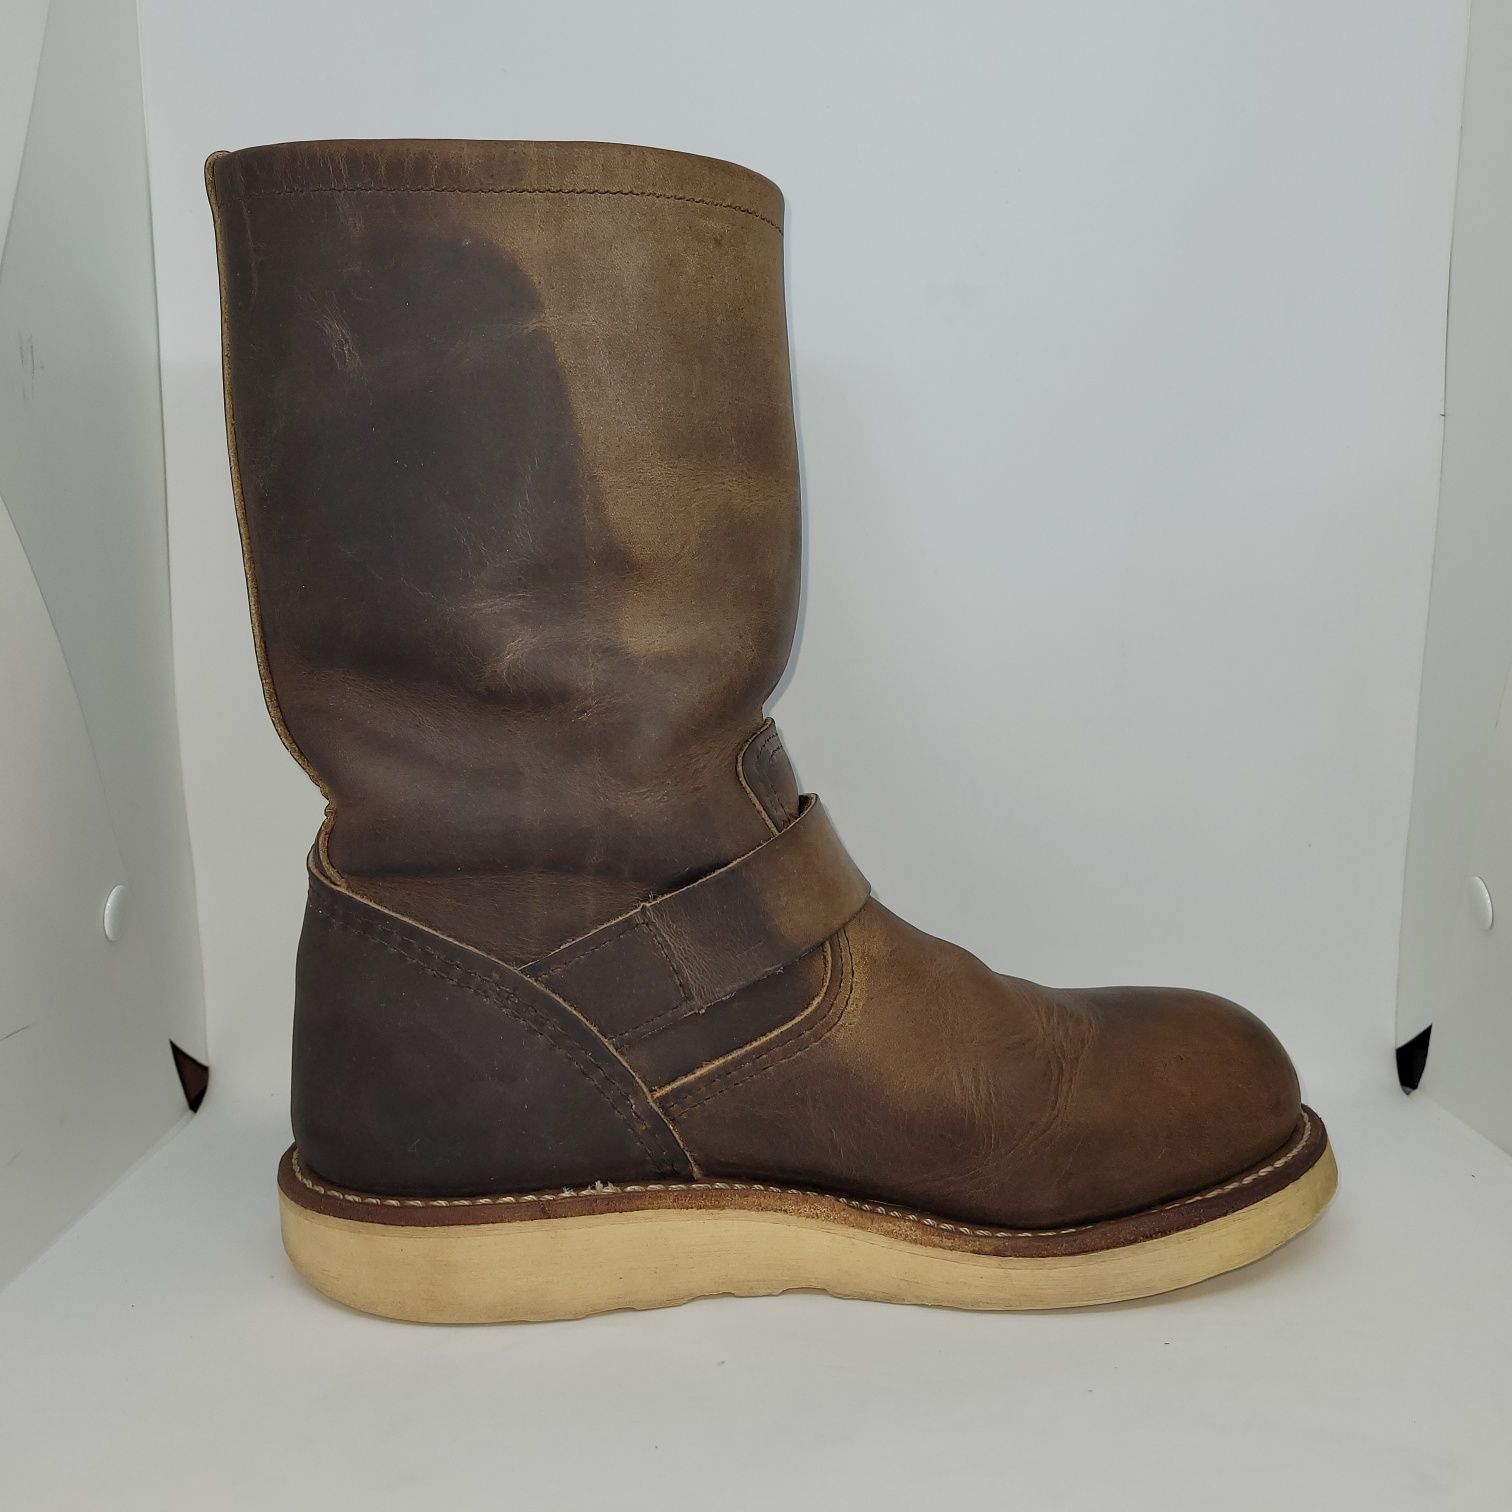 Red Wing 2975 Engineer "Concrete Rough and Tough" Boot ( USA 5,5 D)